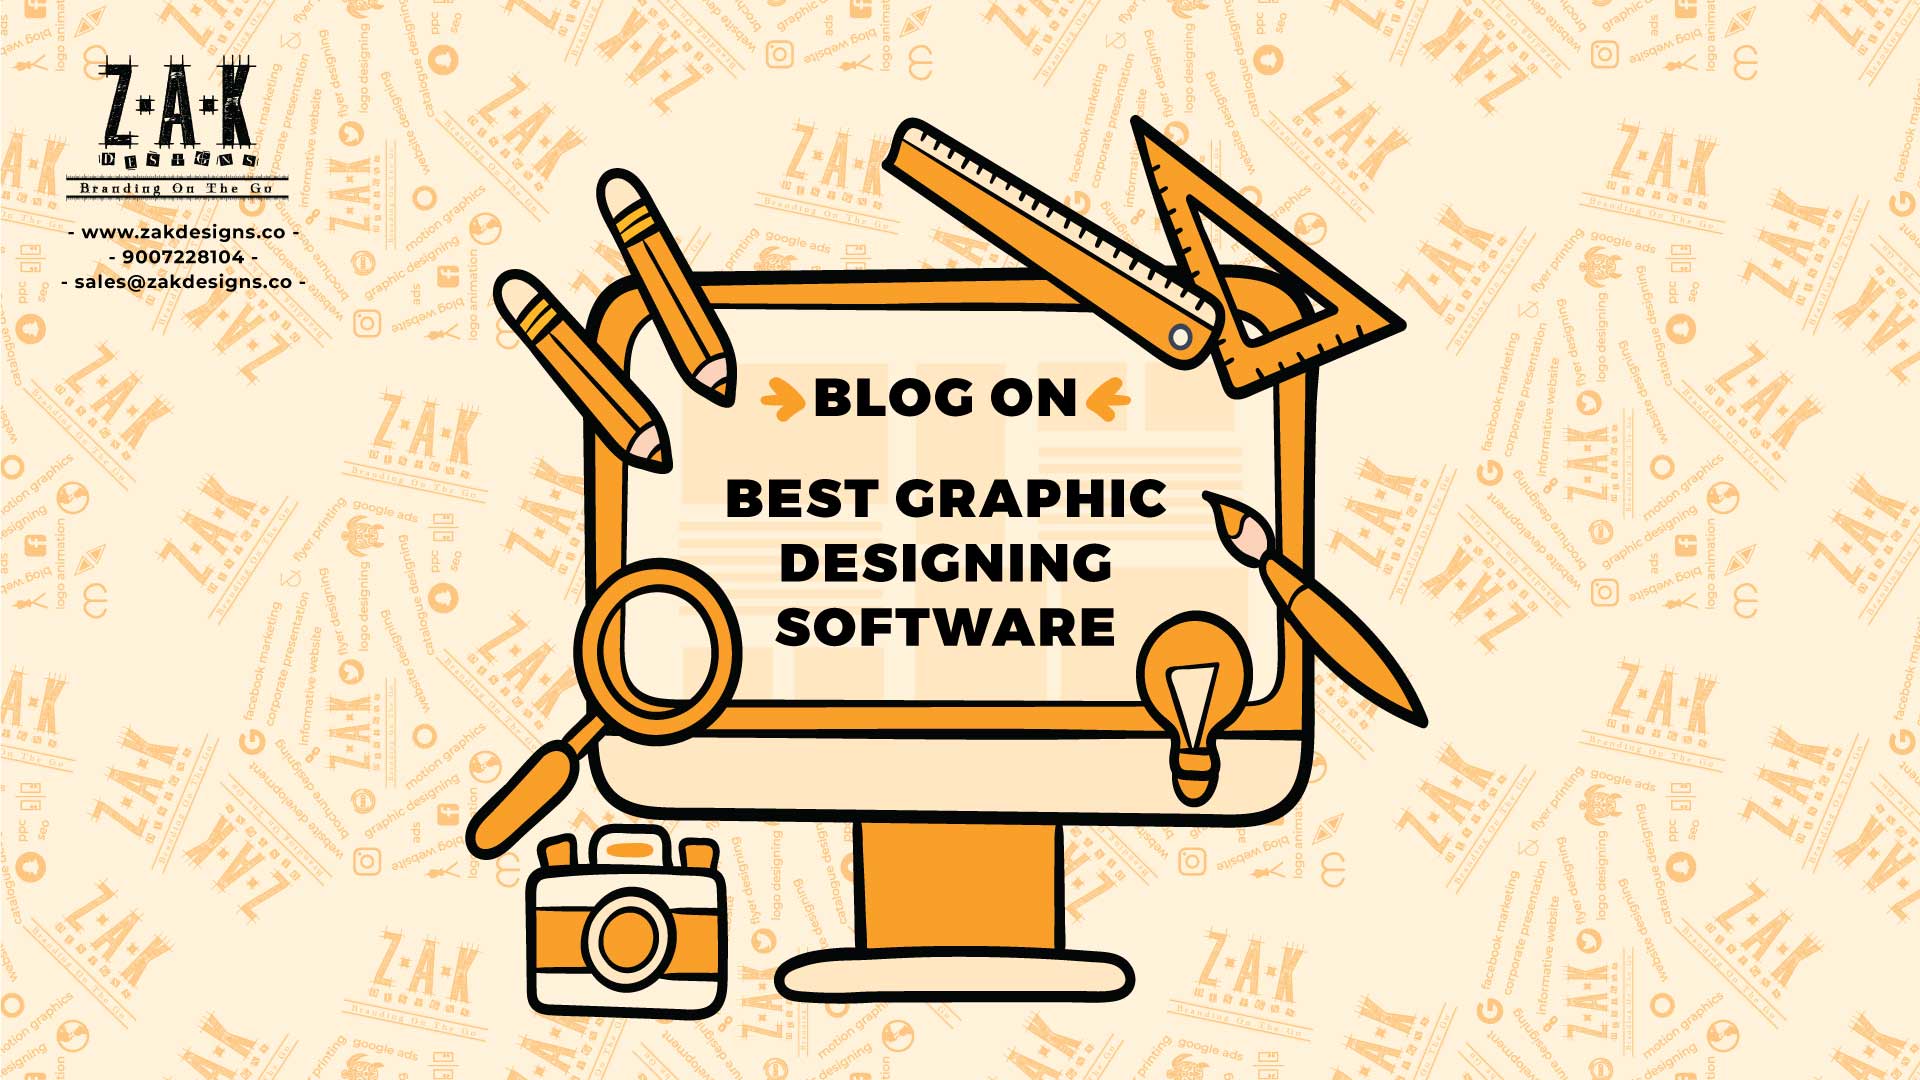 Blog on best graphic designing software by Zain Ahmed Kamal